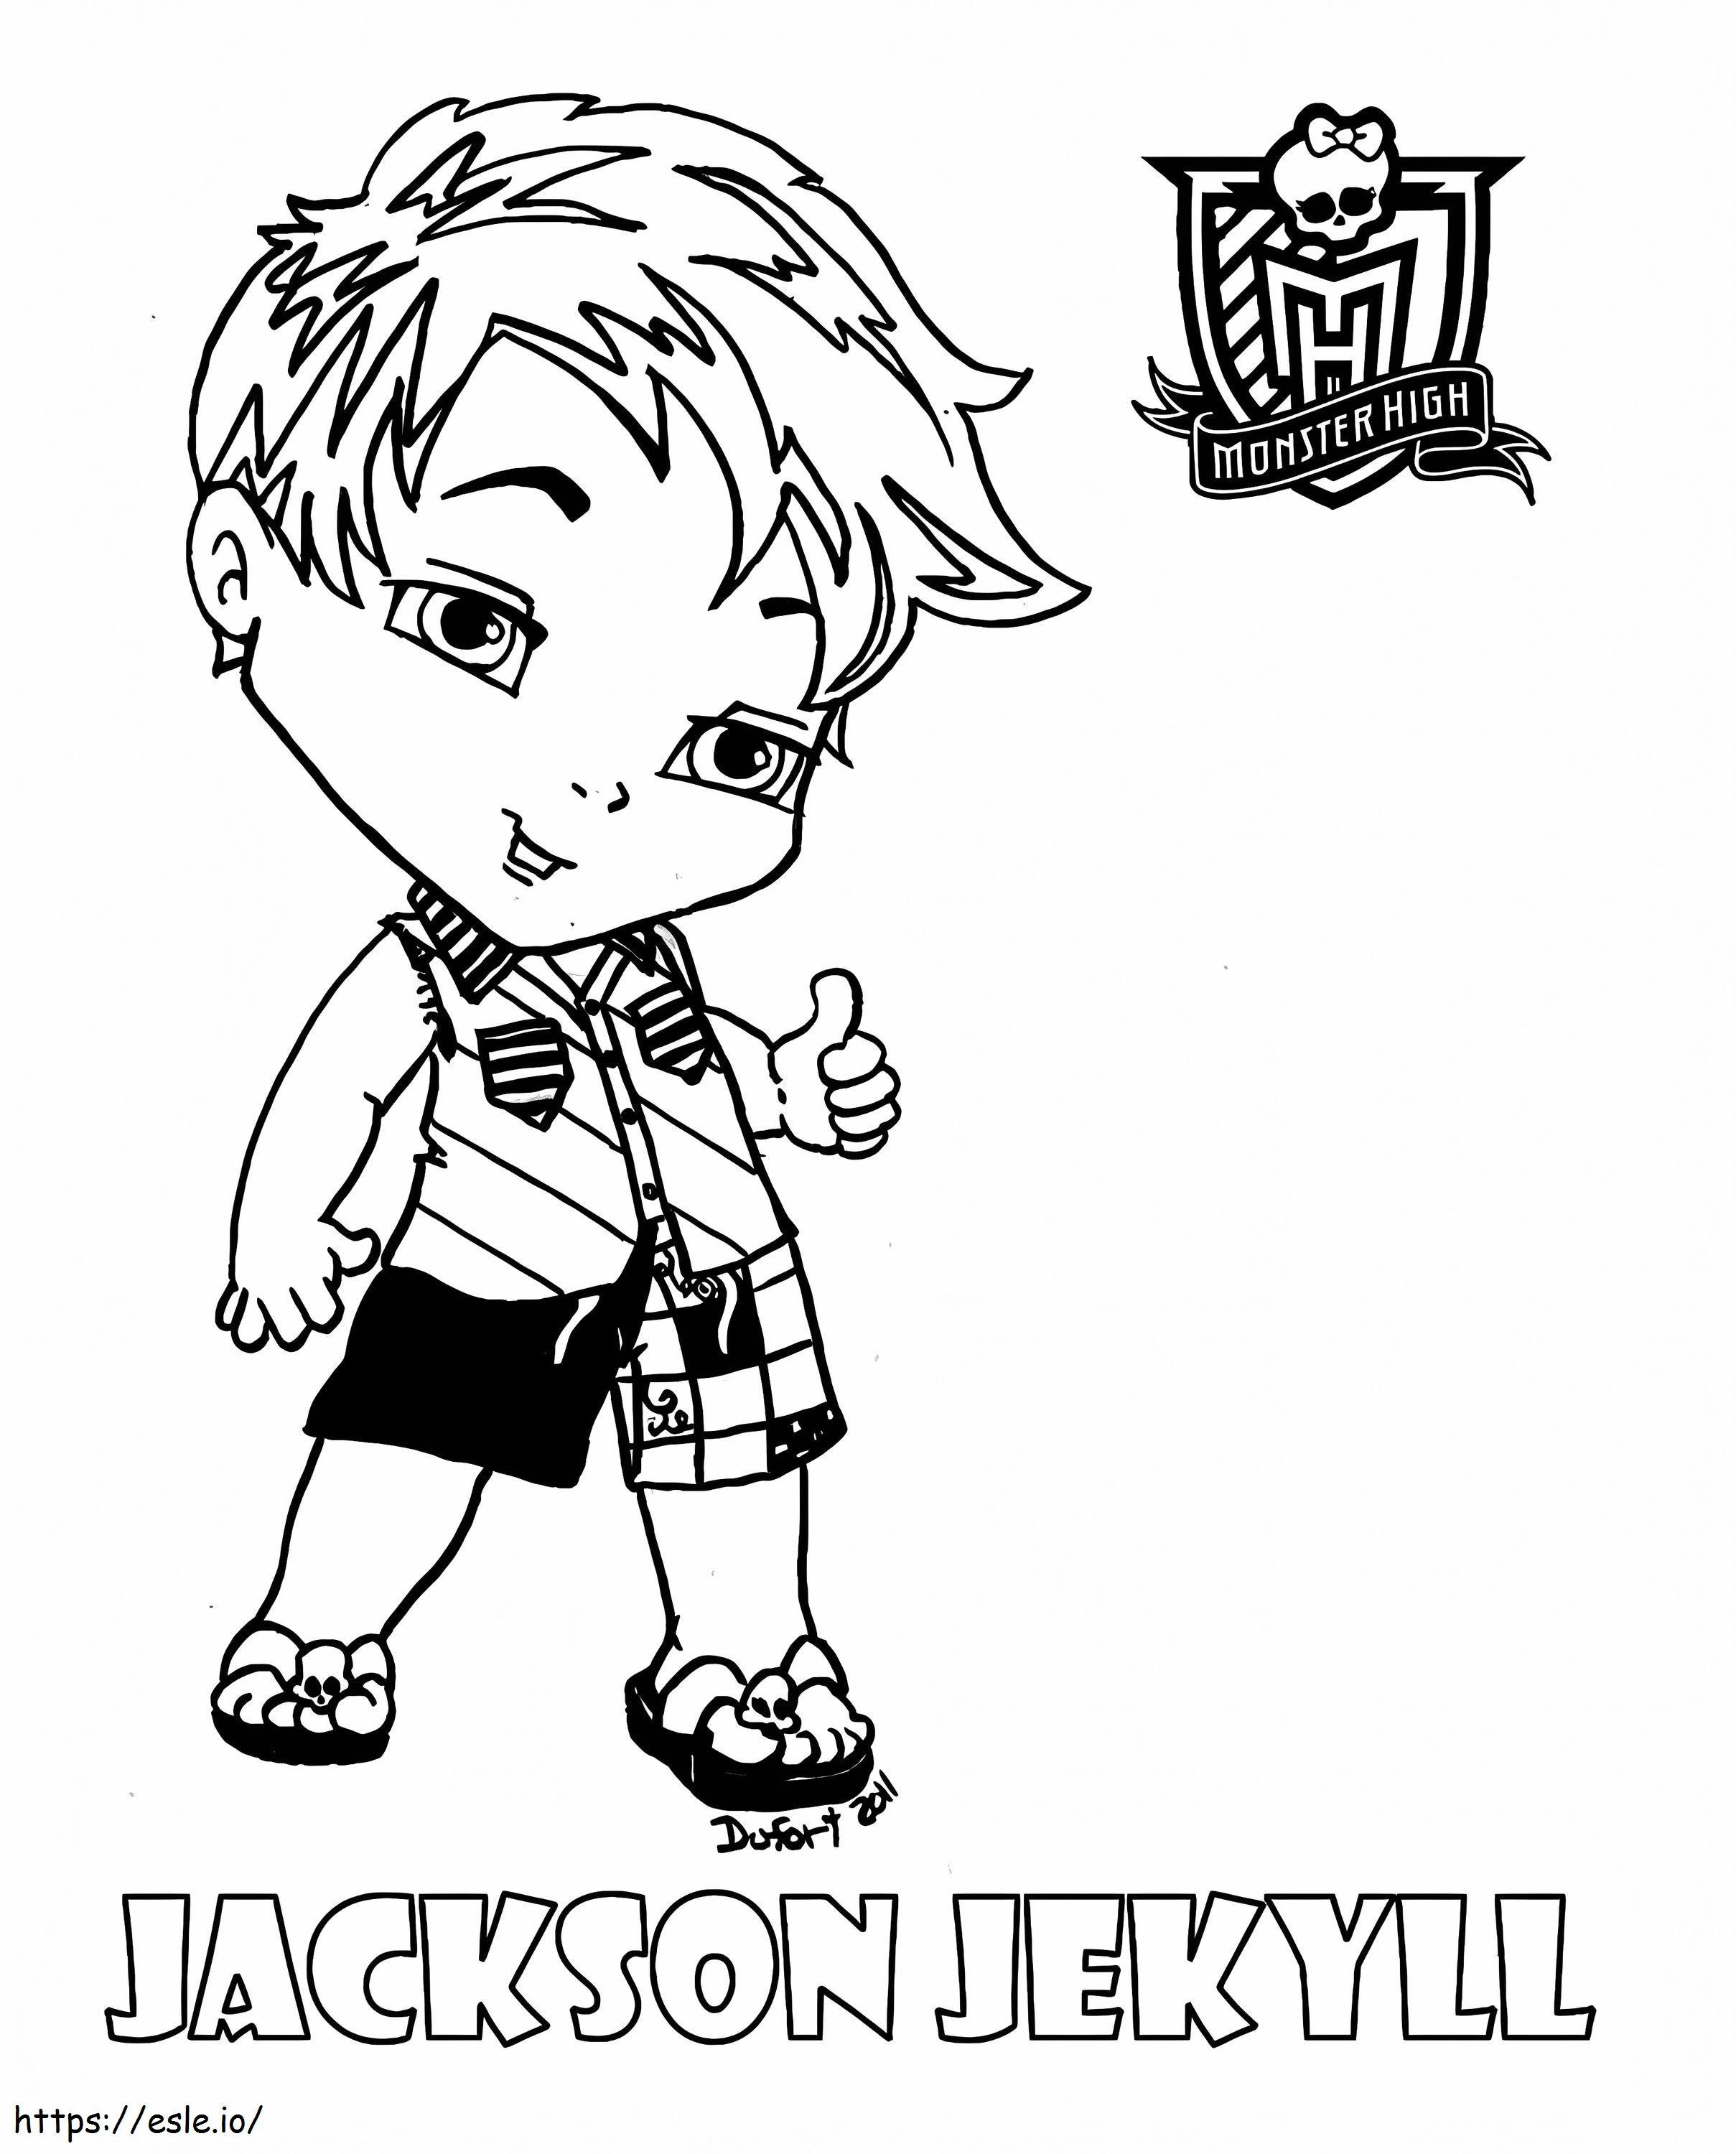 Monster High Baby Jackson Jekyll coloring page